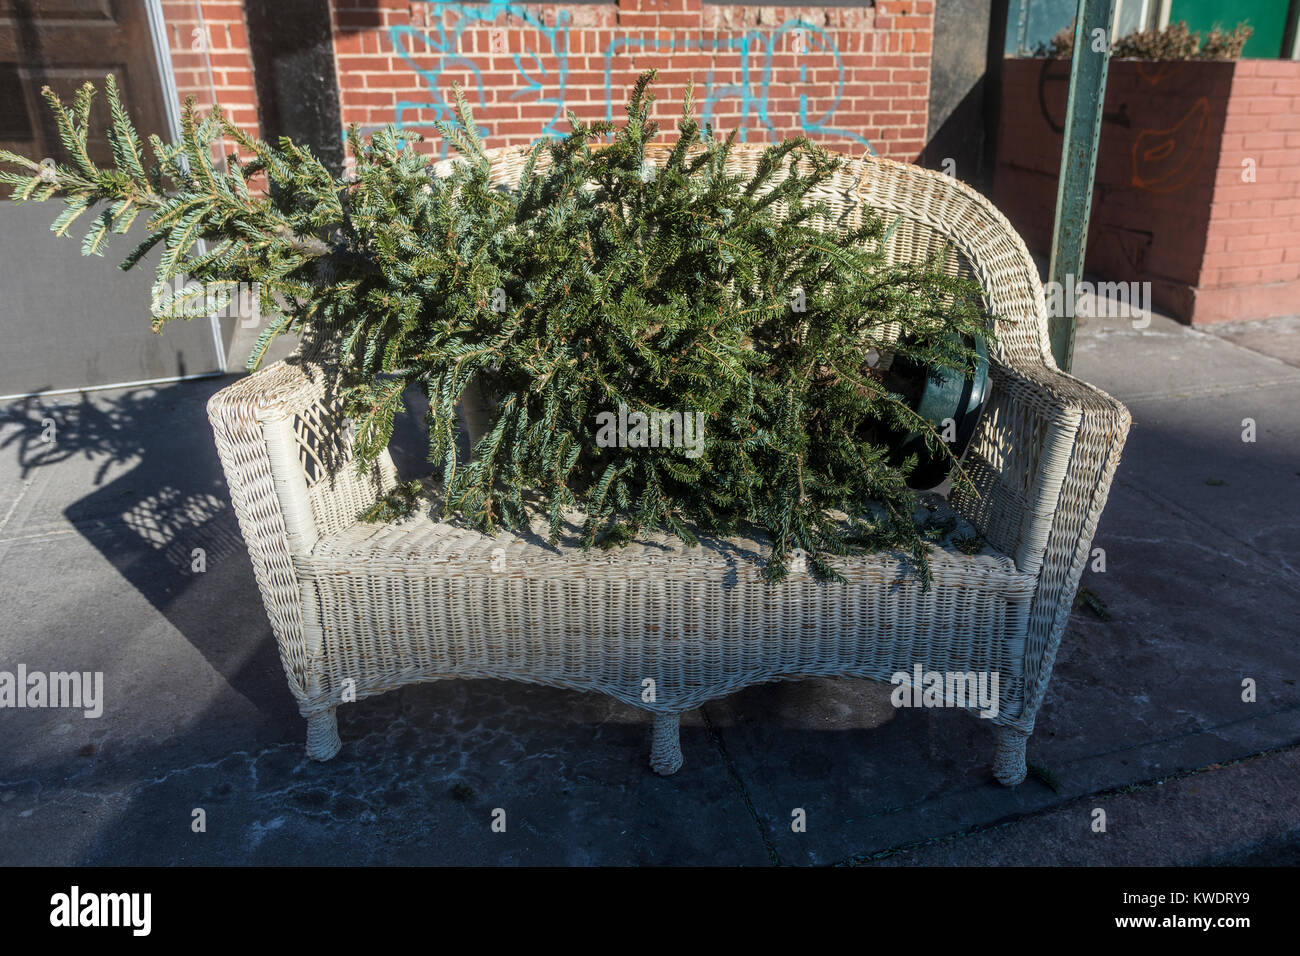 New York, NY, USA 2 Januay 2018 - Discarded Christmas tree sits by the curb , in a wicker loveseat, awaiting recycling. ©Stacy Walsh Rosenstock Stock Photo